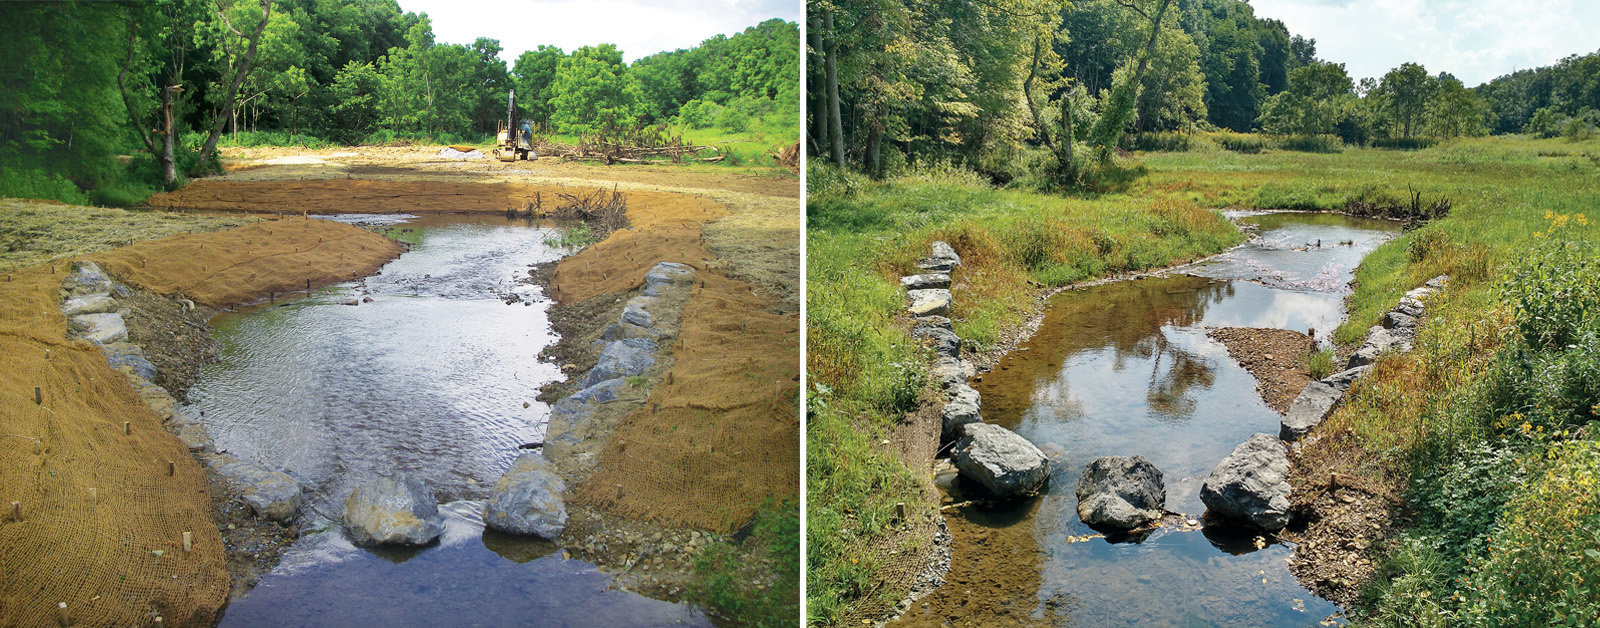 Two photos of the same stream side by side. The left photos shows earthwork and rocks placed strategically, while the second photo shows the results of the work with lush green streambanks and clear water.